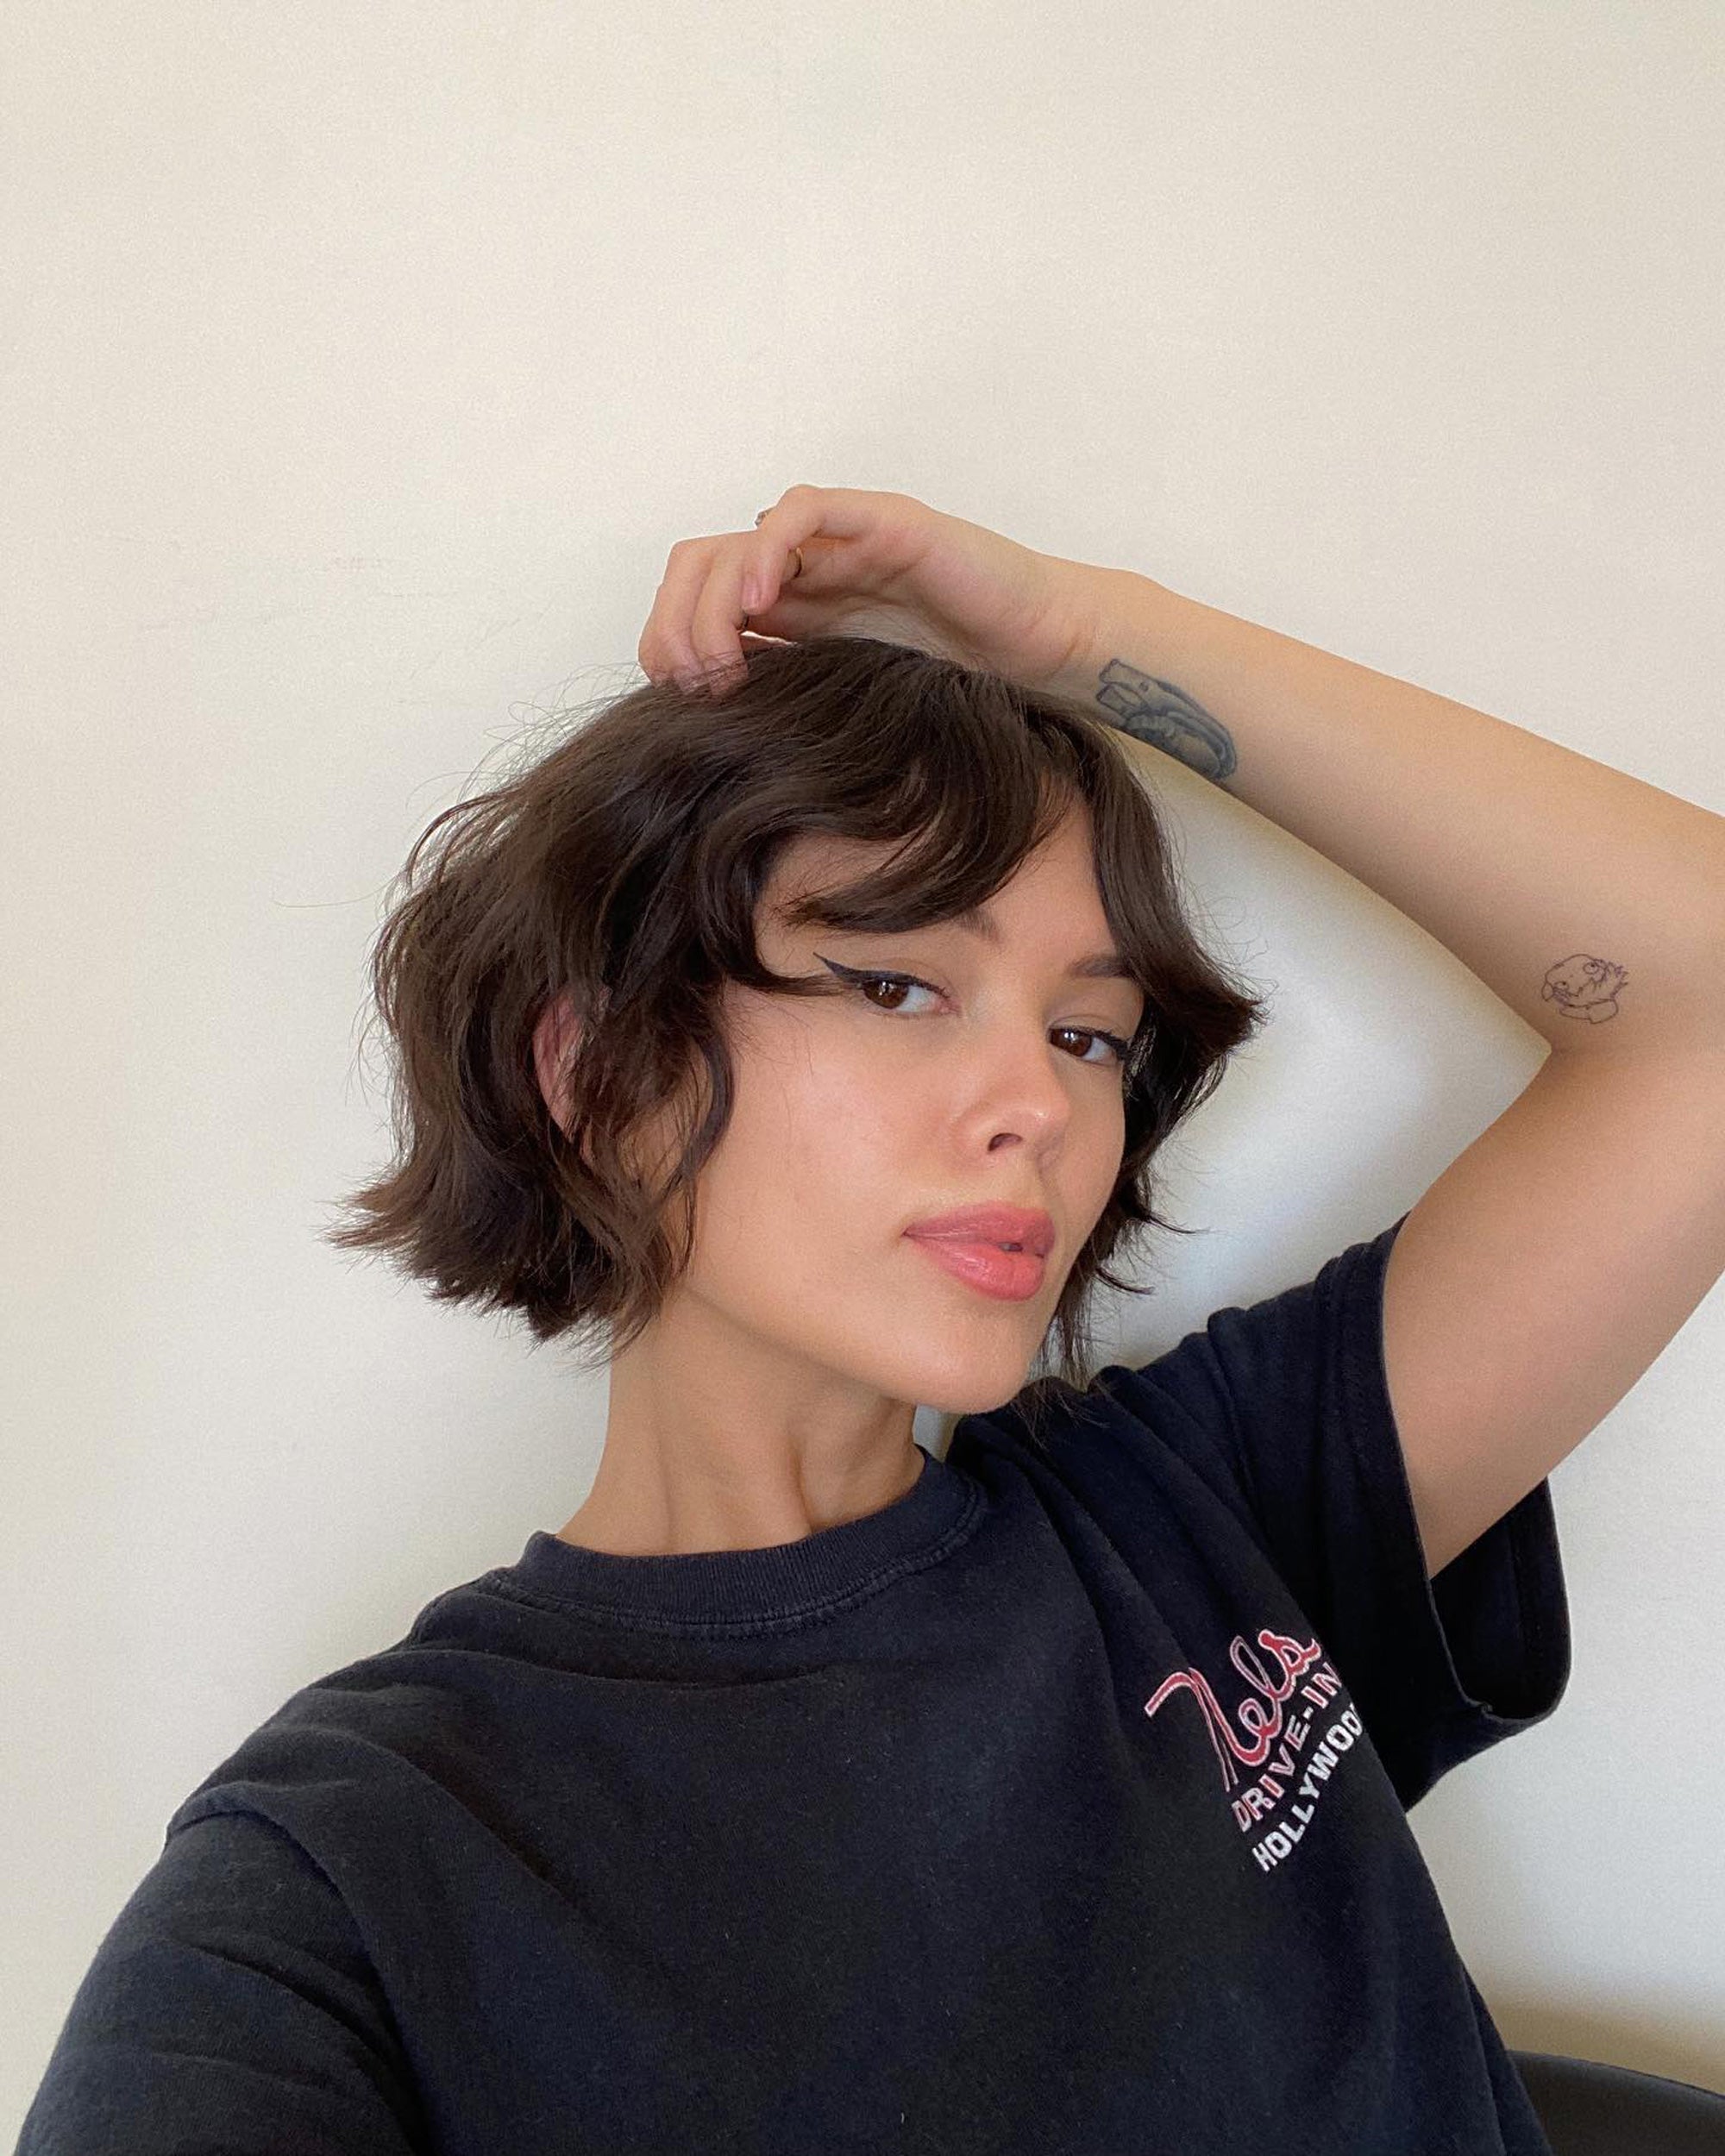 This Summer's Most Unexpected Haircut Trend Is the Classic Bob